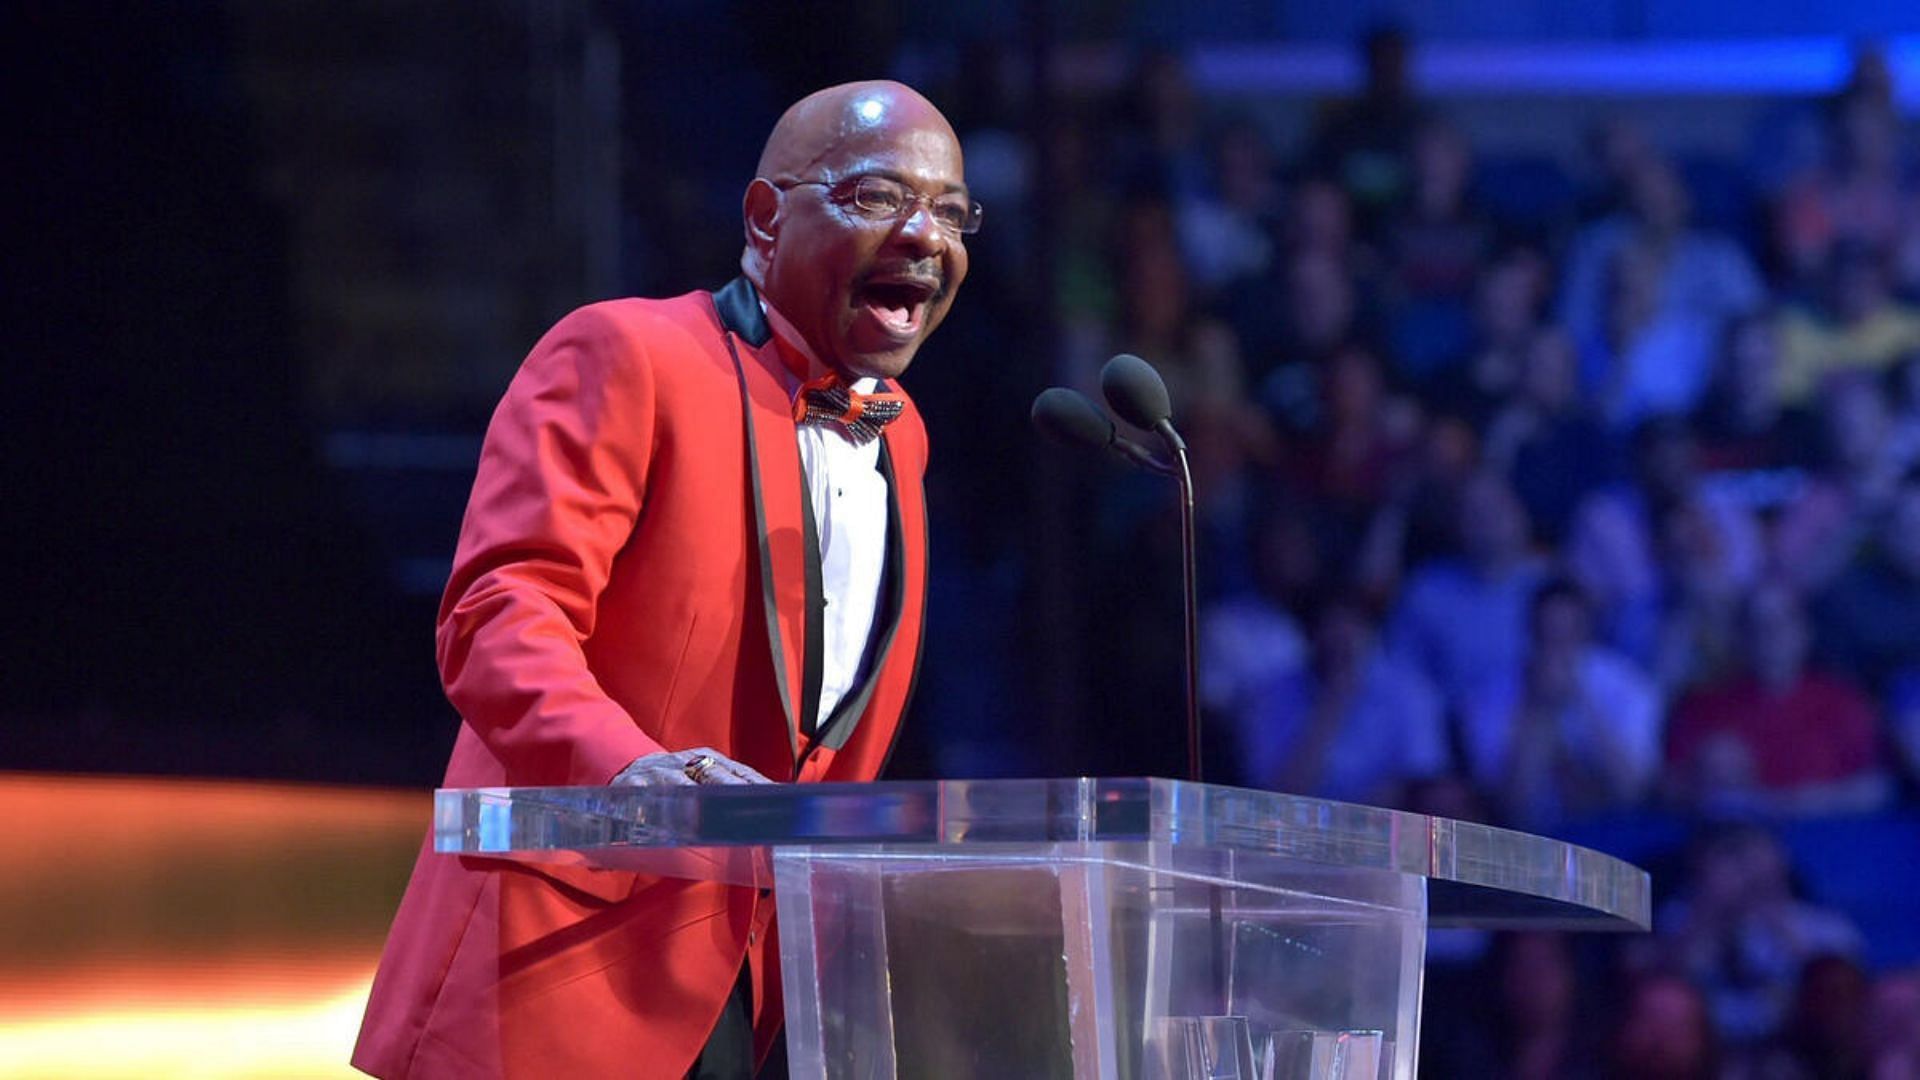 Teddy Long is a former general manager, who is now a WWE Hall of Famer [Photo courtesy of WWE